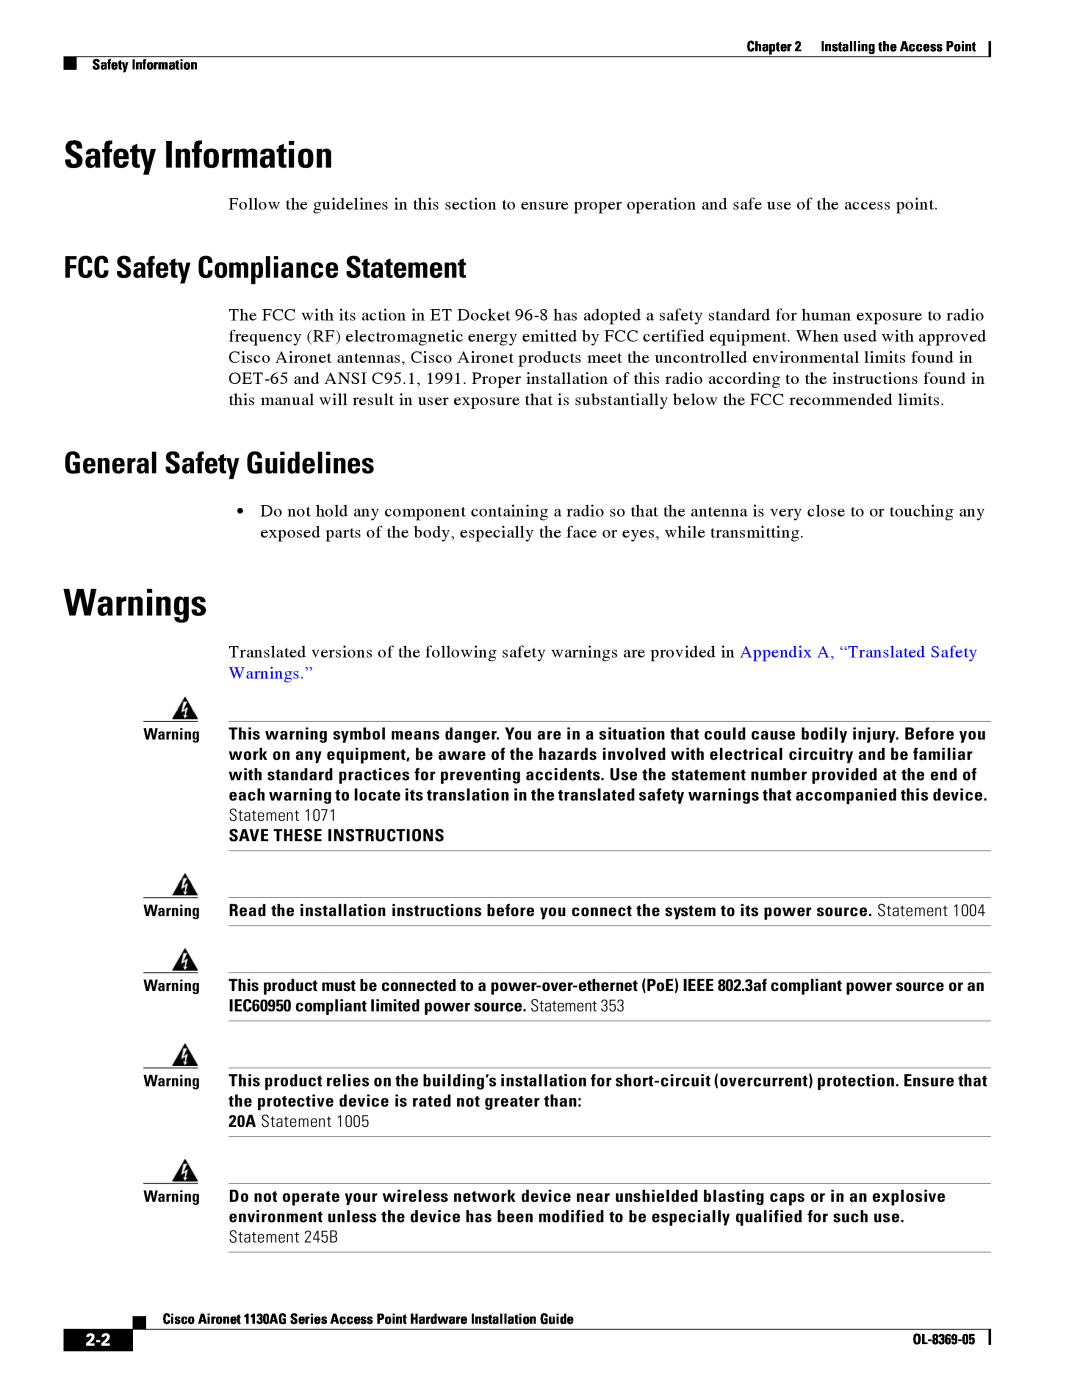 Cisco Systems 1130AG manual Safety Information, Warnings, FCC Safety Compliance Statement, General Safety Guidelines 